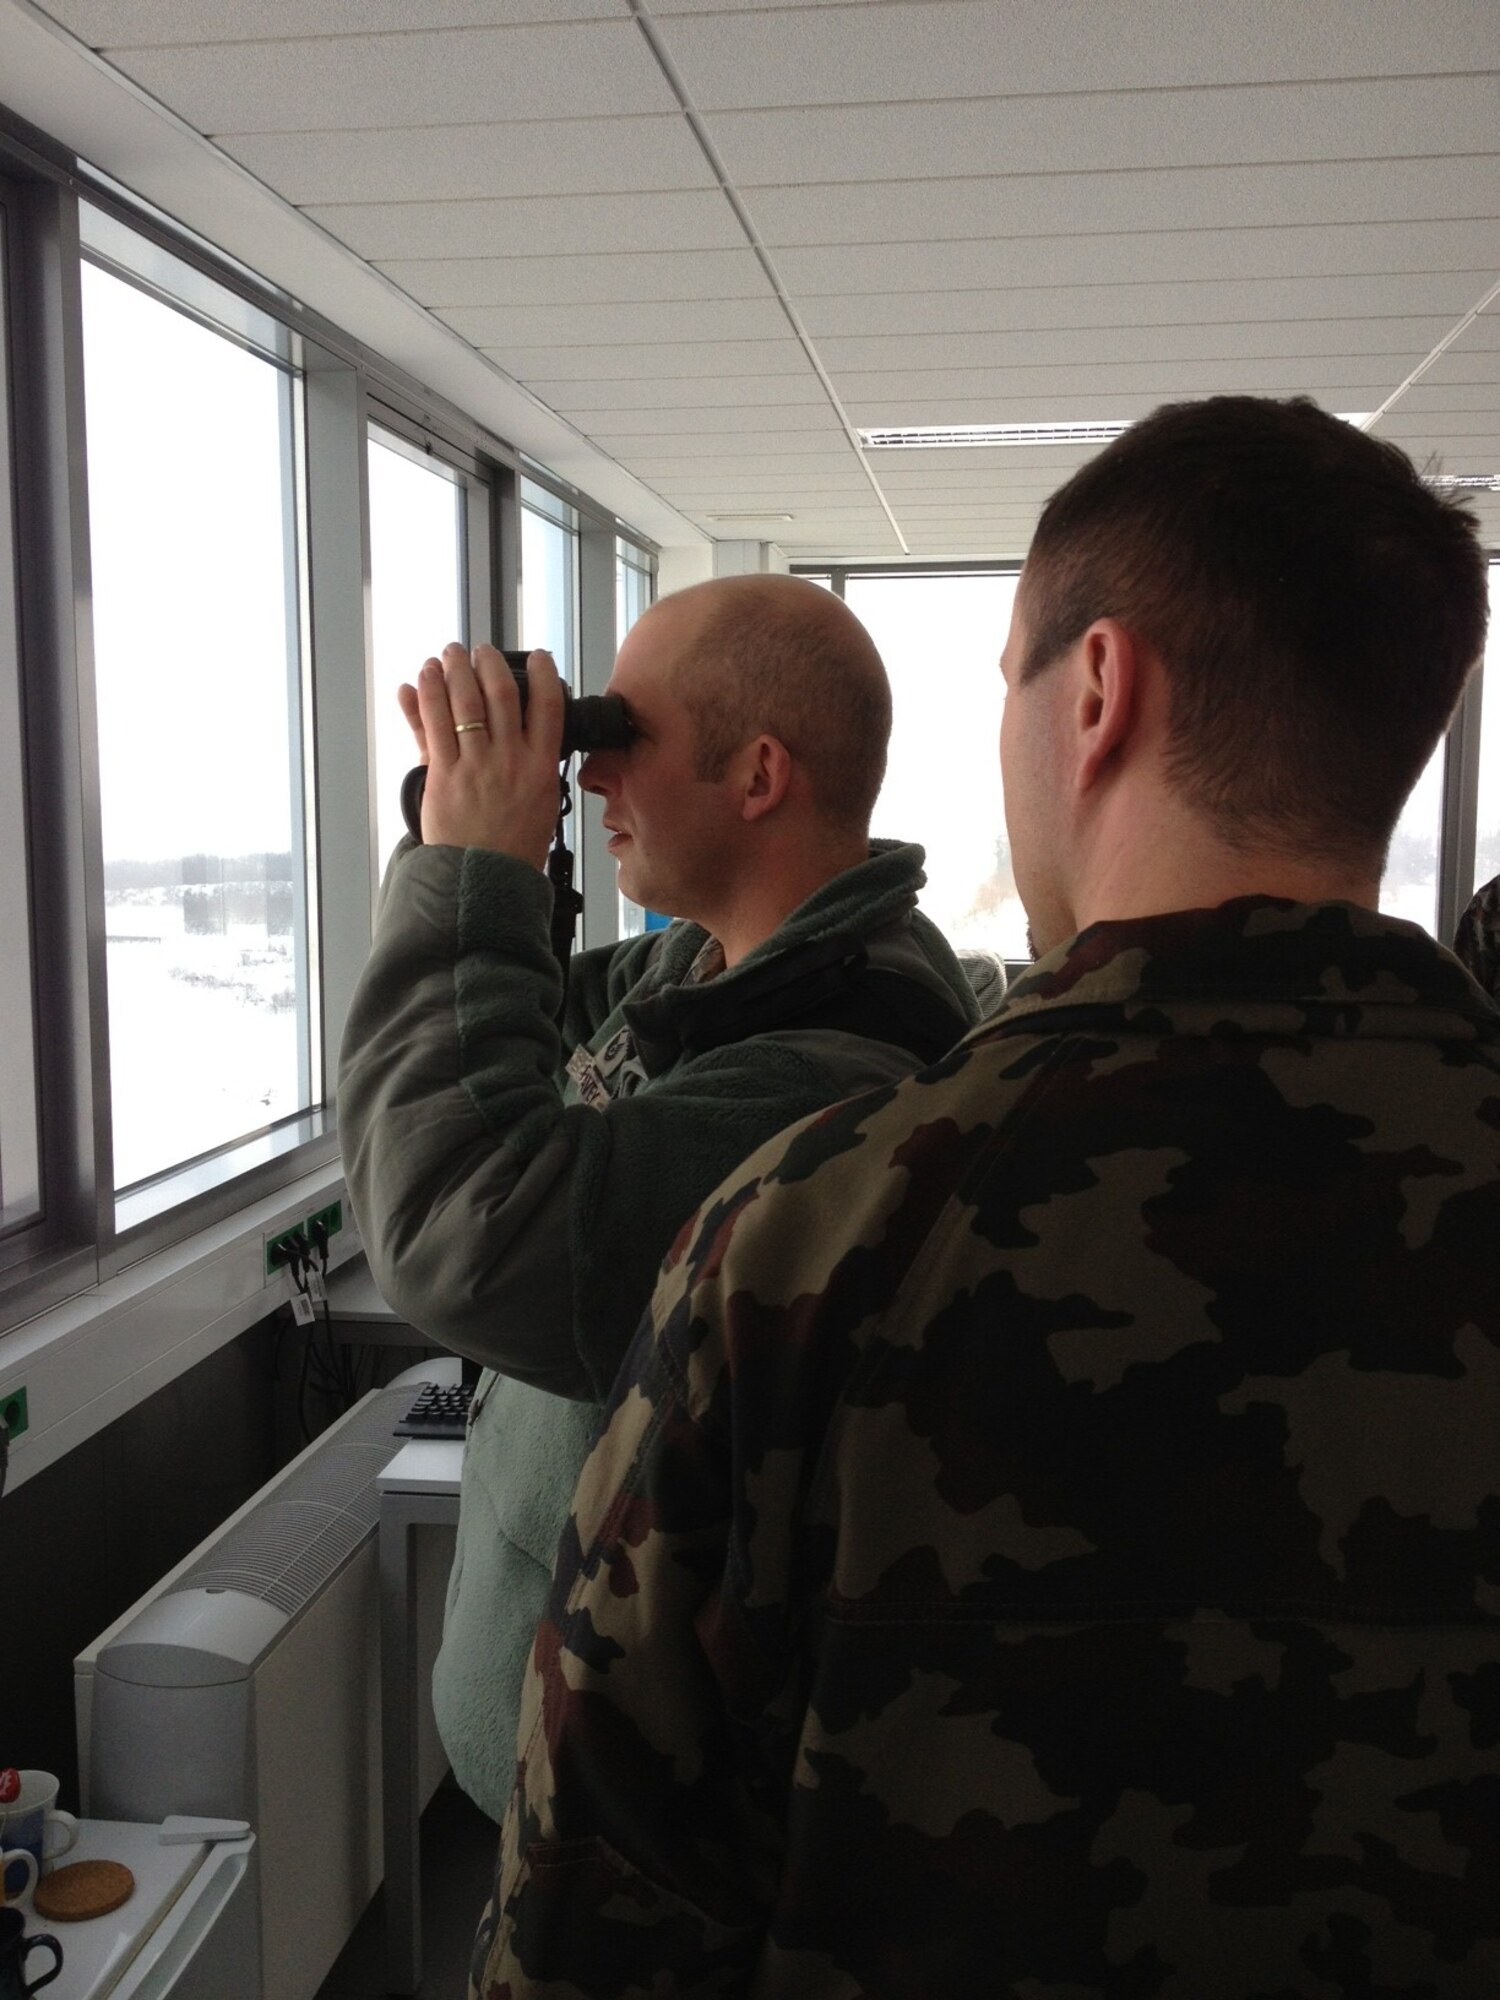 Master Sgt. Jay Peavey, 435th Contingency Response Group air advisor and security superintendent, views the ramp and runway complex from the newly constructed control tower on Cerklje Air Base, Slovenia, Dec. 22, 2012. (courtesy photo)